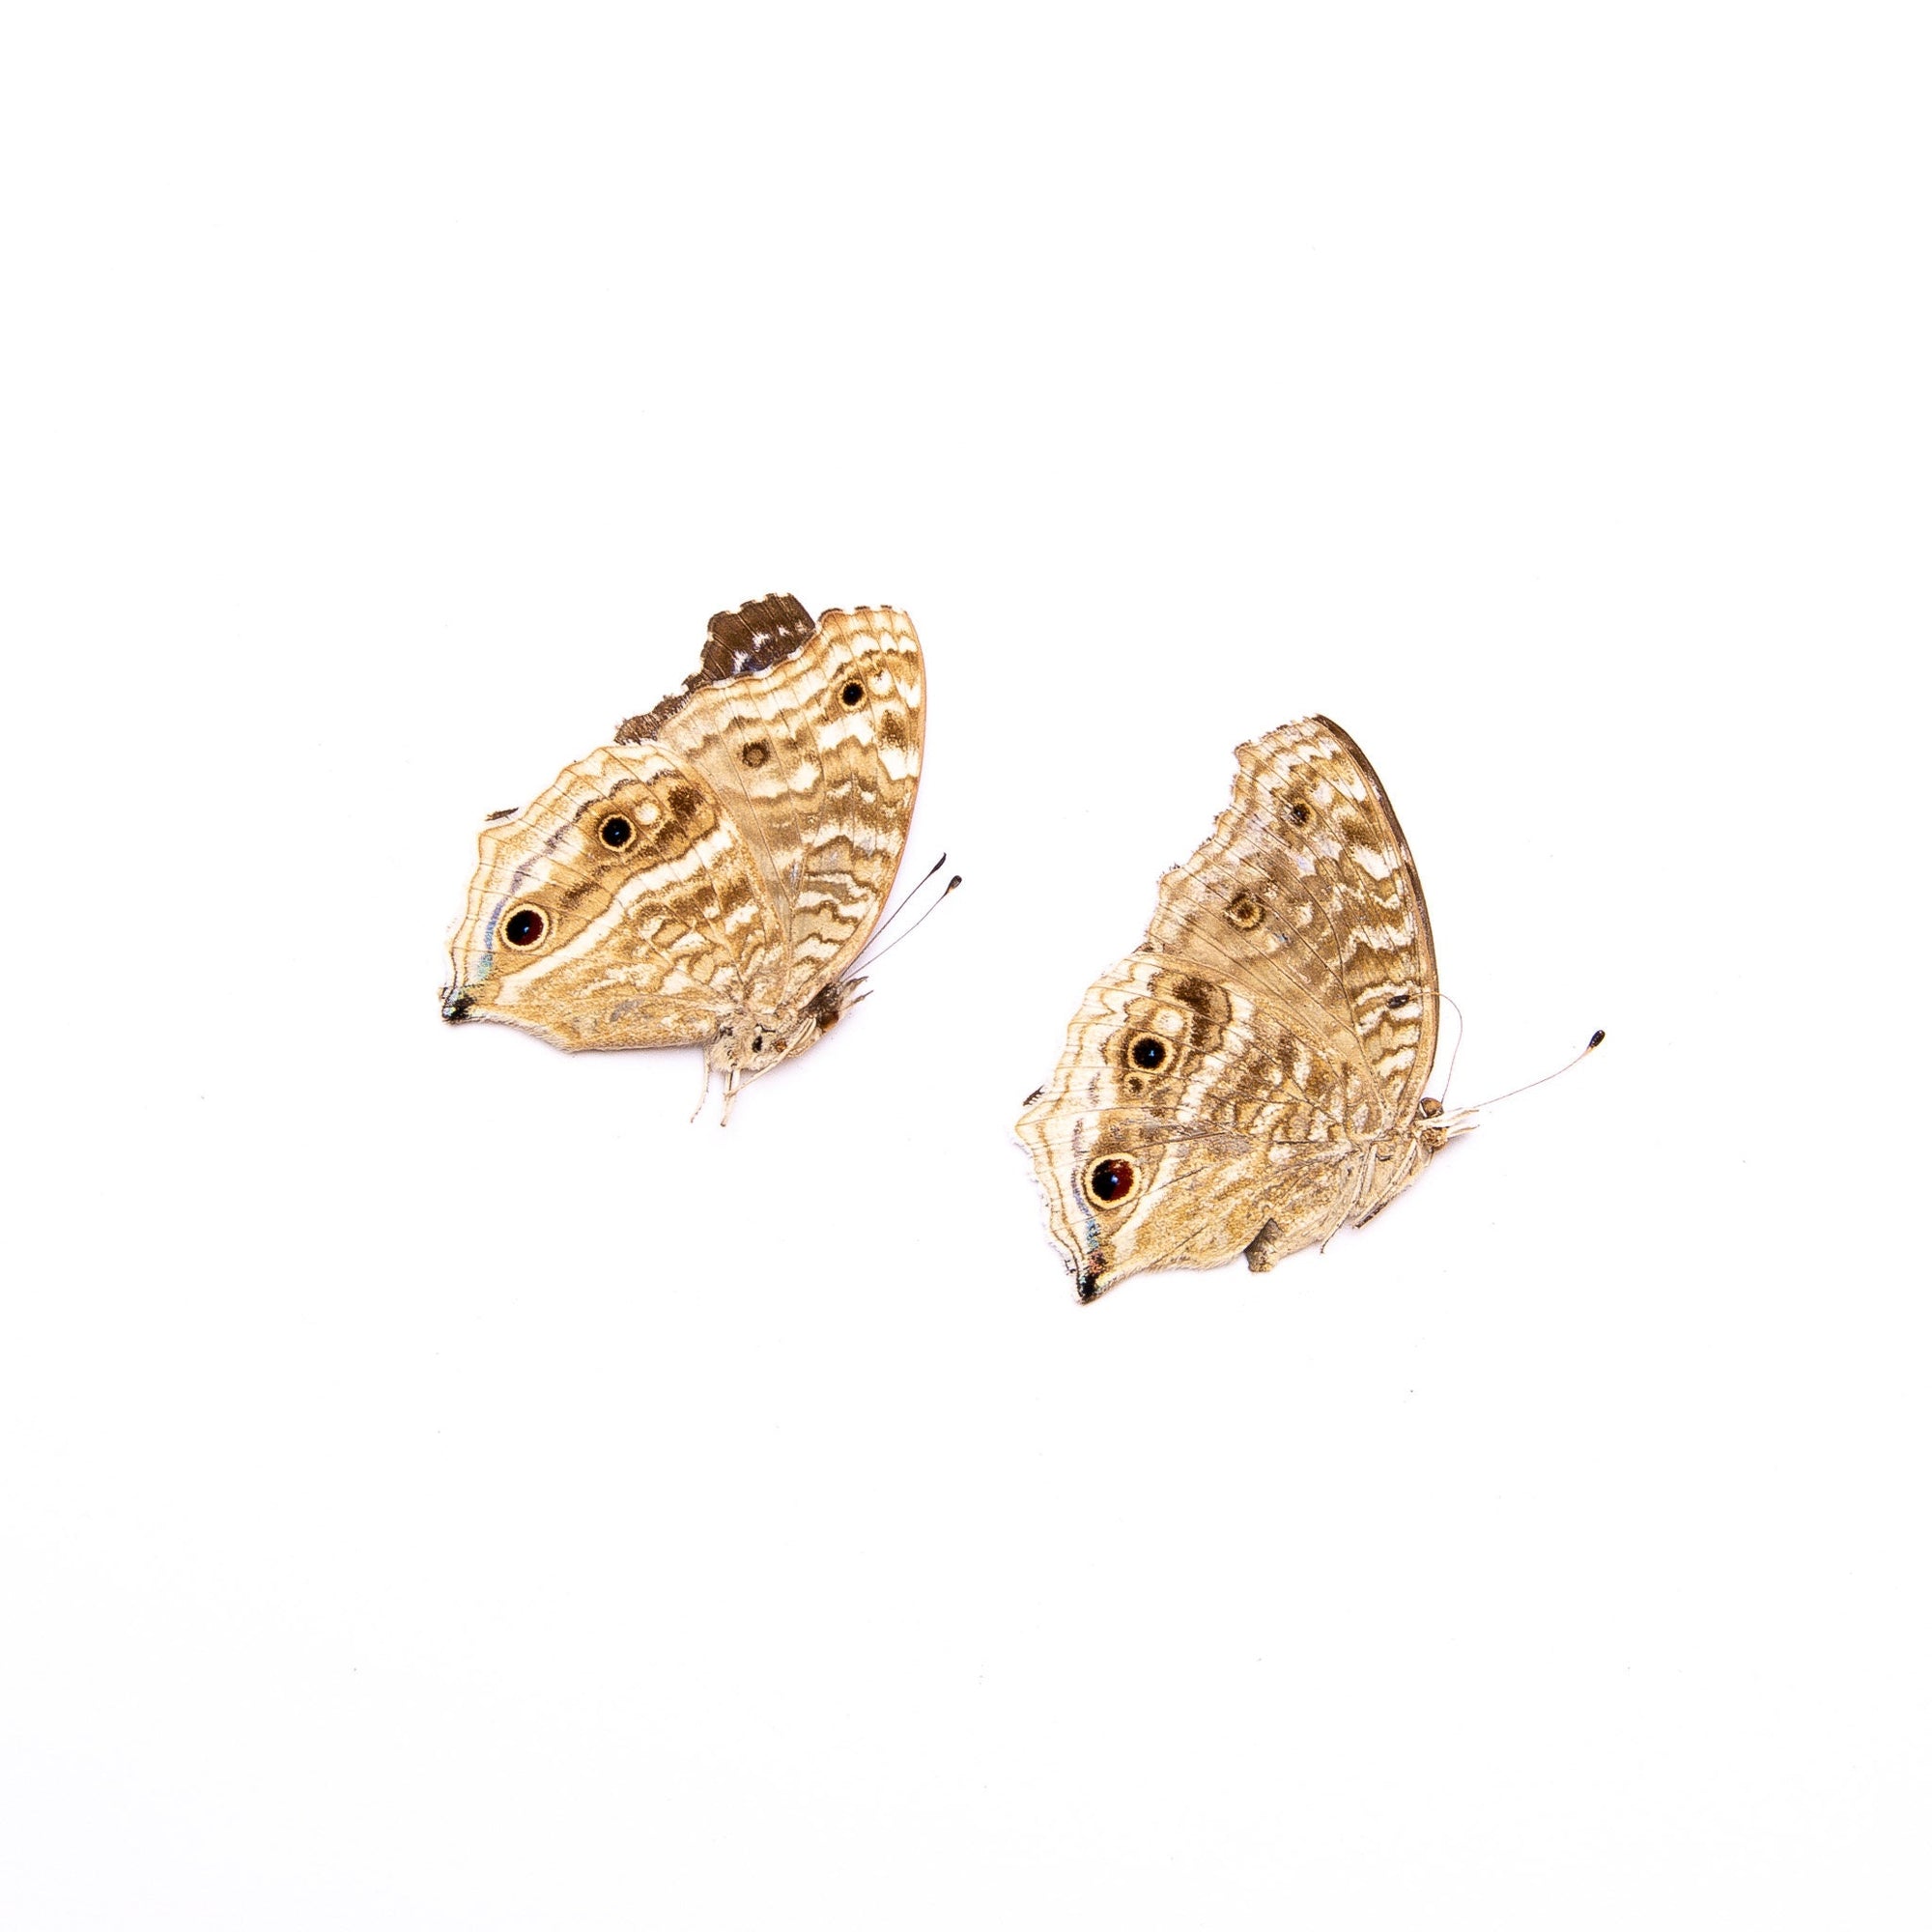 TWO (2) Junonia rhadama | A1 Real Dry-Preserved Butterflies | Unmounted Entomology Taxidermy Specimens